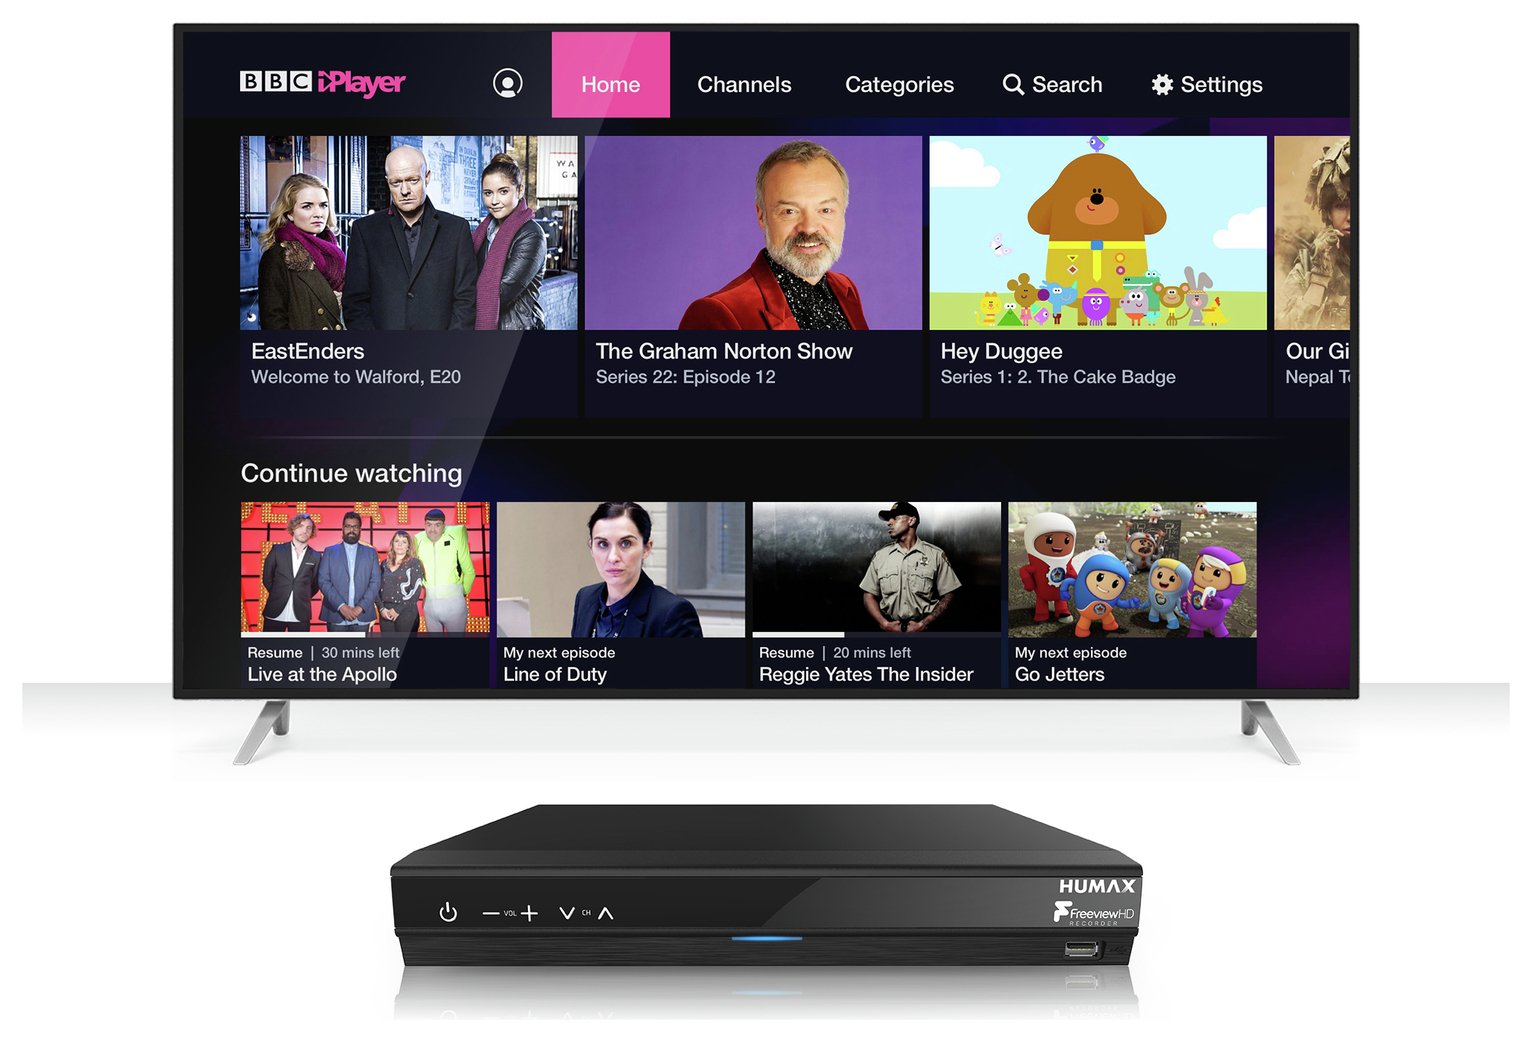 Humax Freeview HDR-1800T 500GB Freeview+ HD Recorder Review